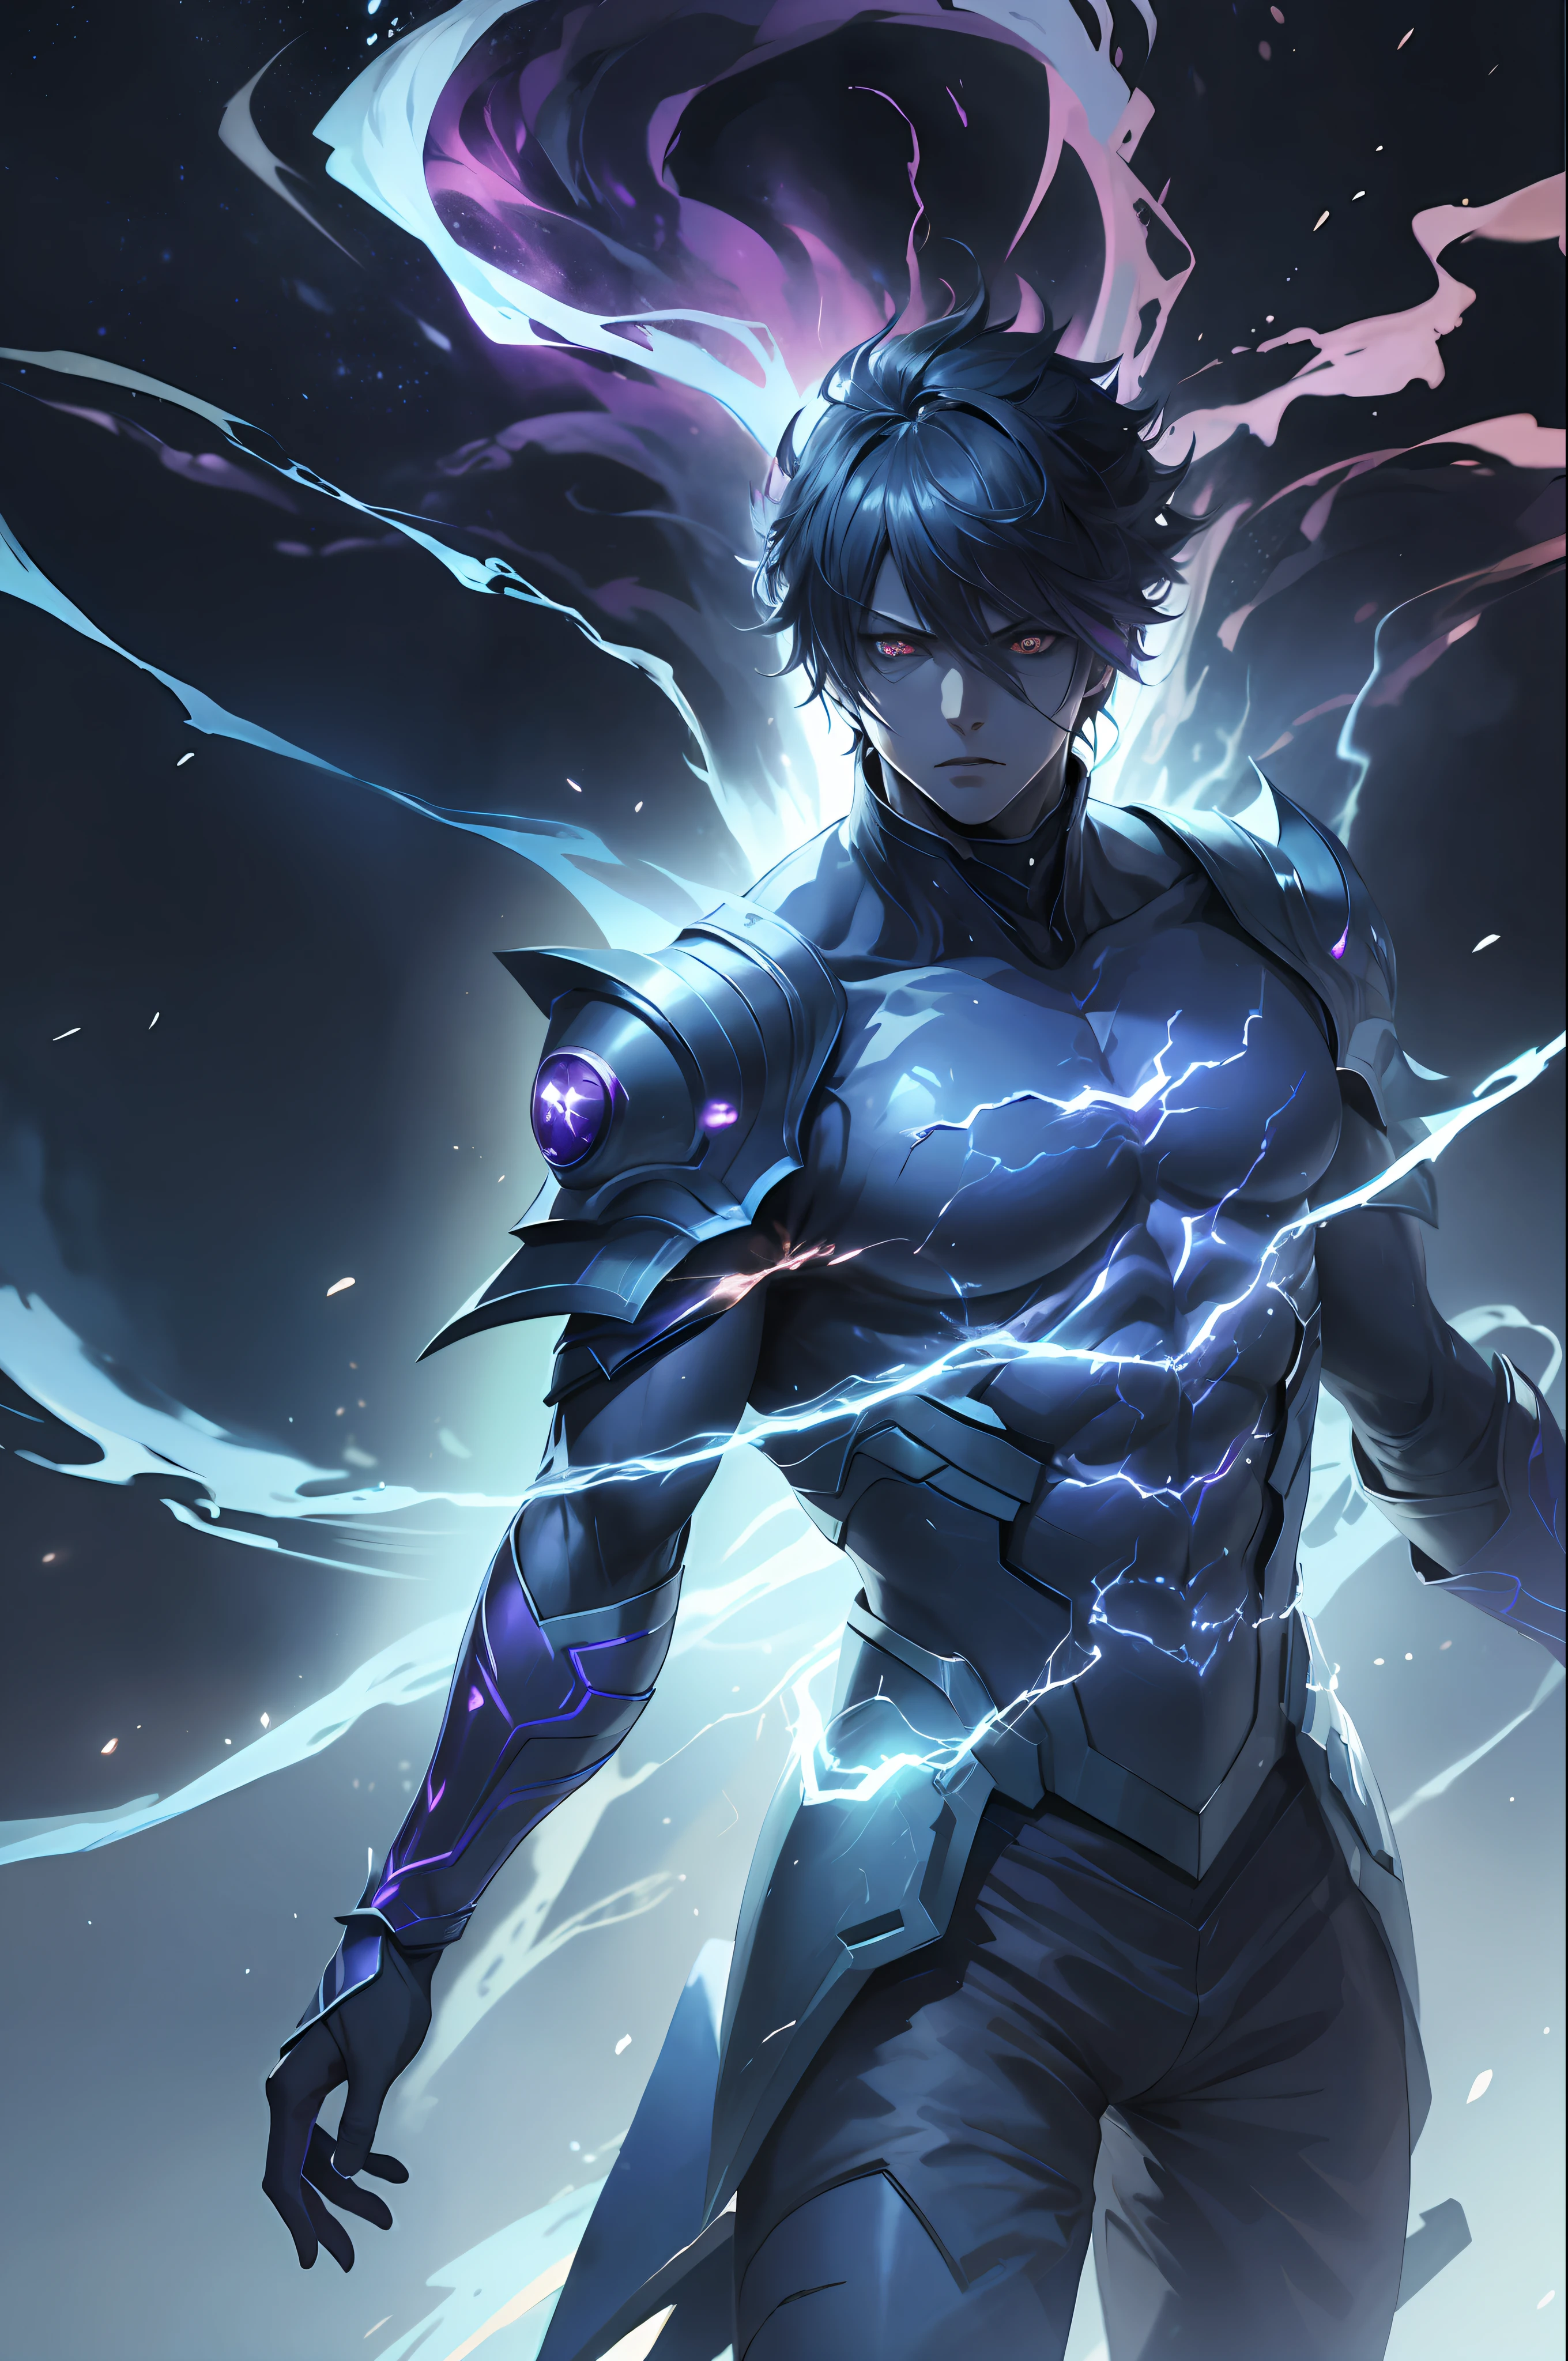 A Painting of Cool Anime Boy with the Essence of Magic, Glowing Particles  Around Him, Black Hair, Shinning Golden Eyes, Fantasy Stock Photo - Image  of anime, fantasy: 299314686